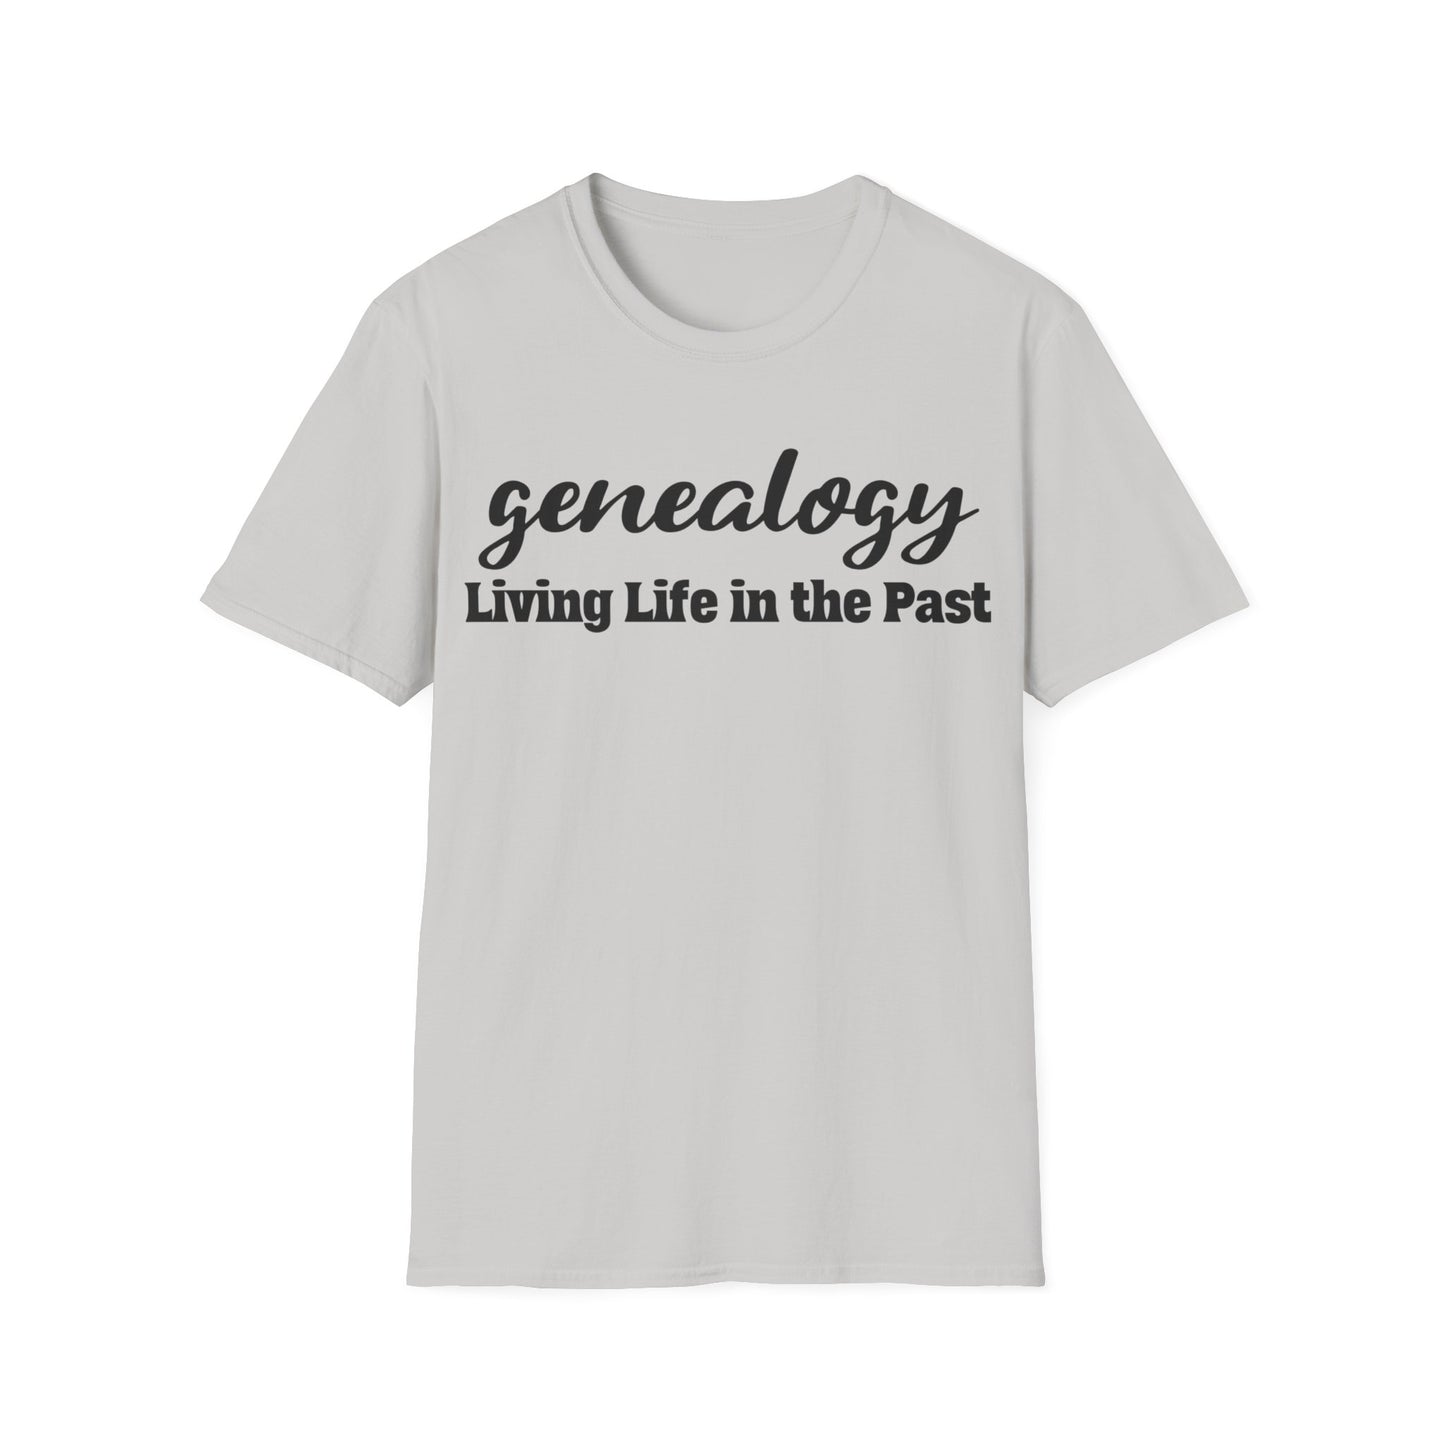 Genealogy-Living Life in the Past